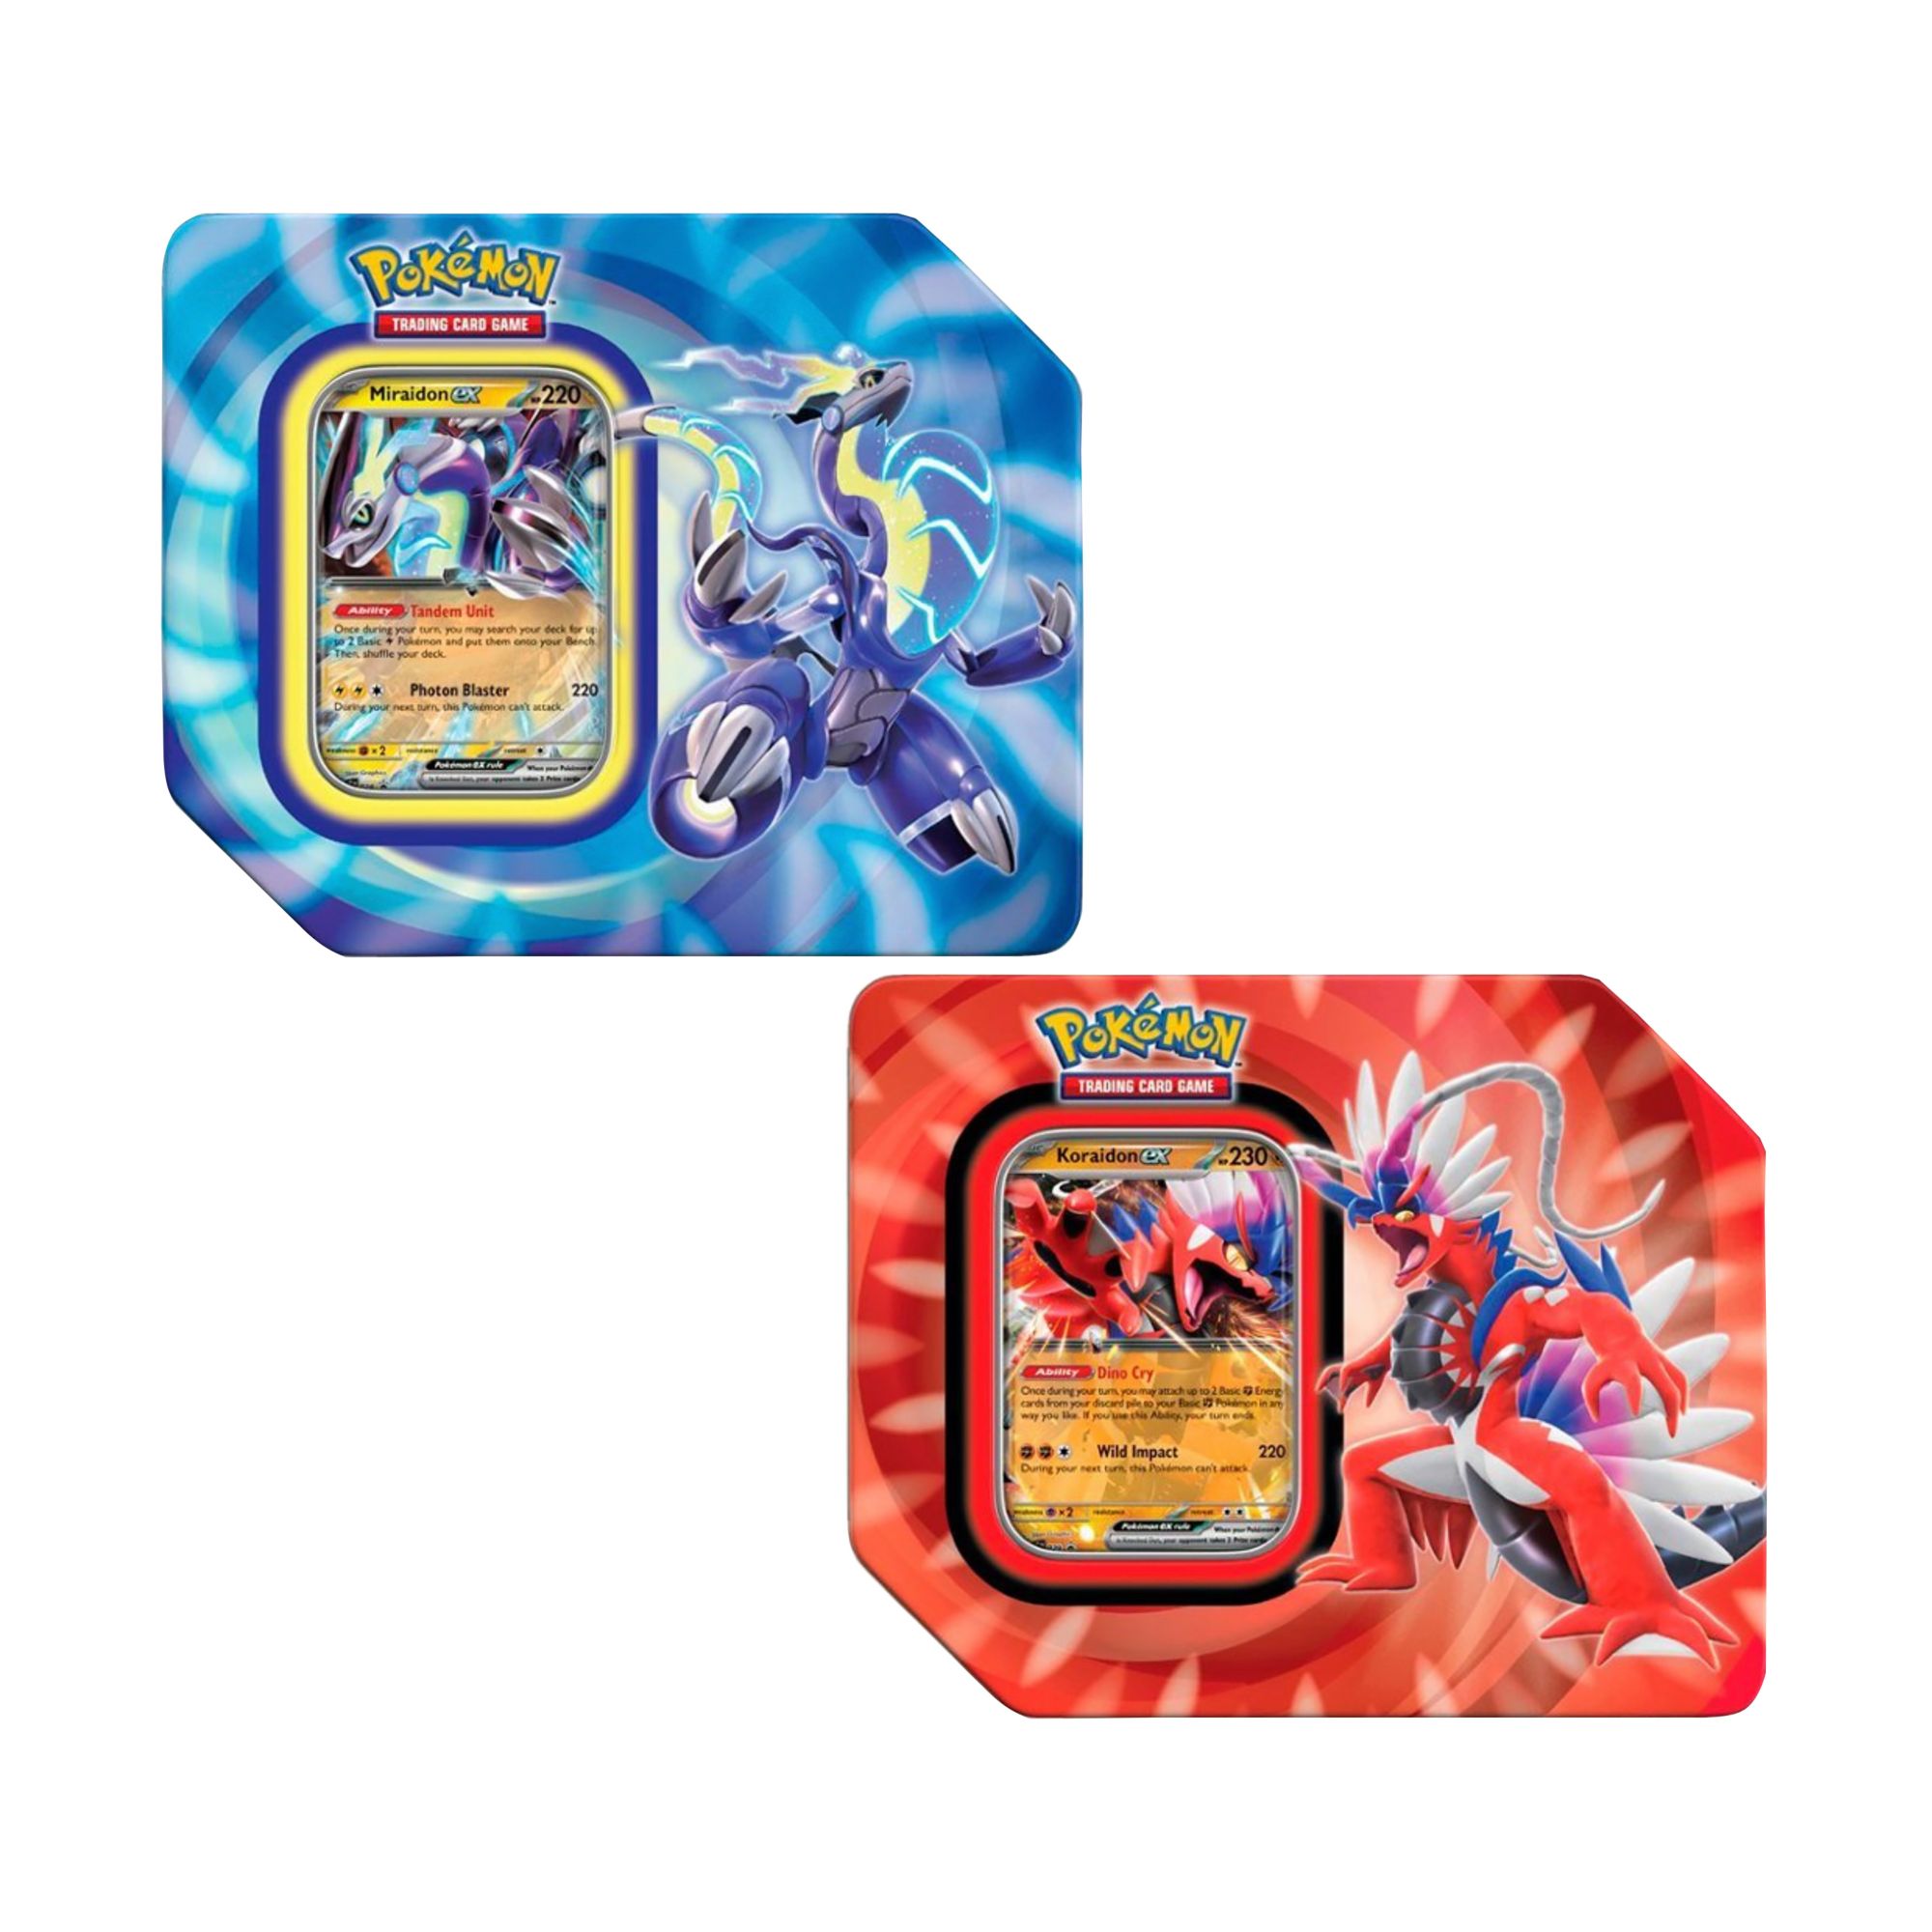 Ultra Pro Pokemon X and Y 2